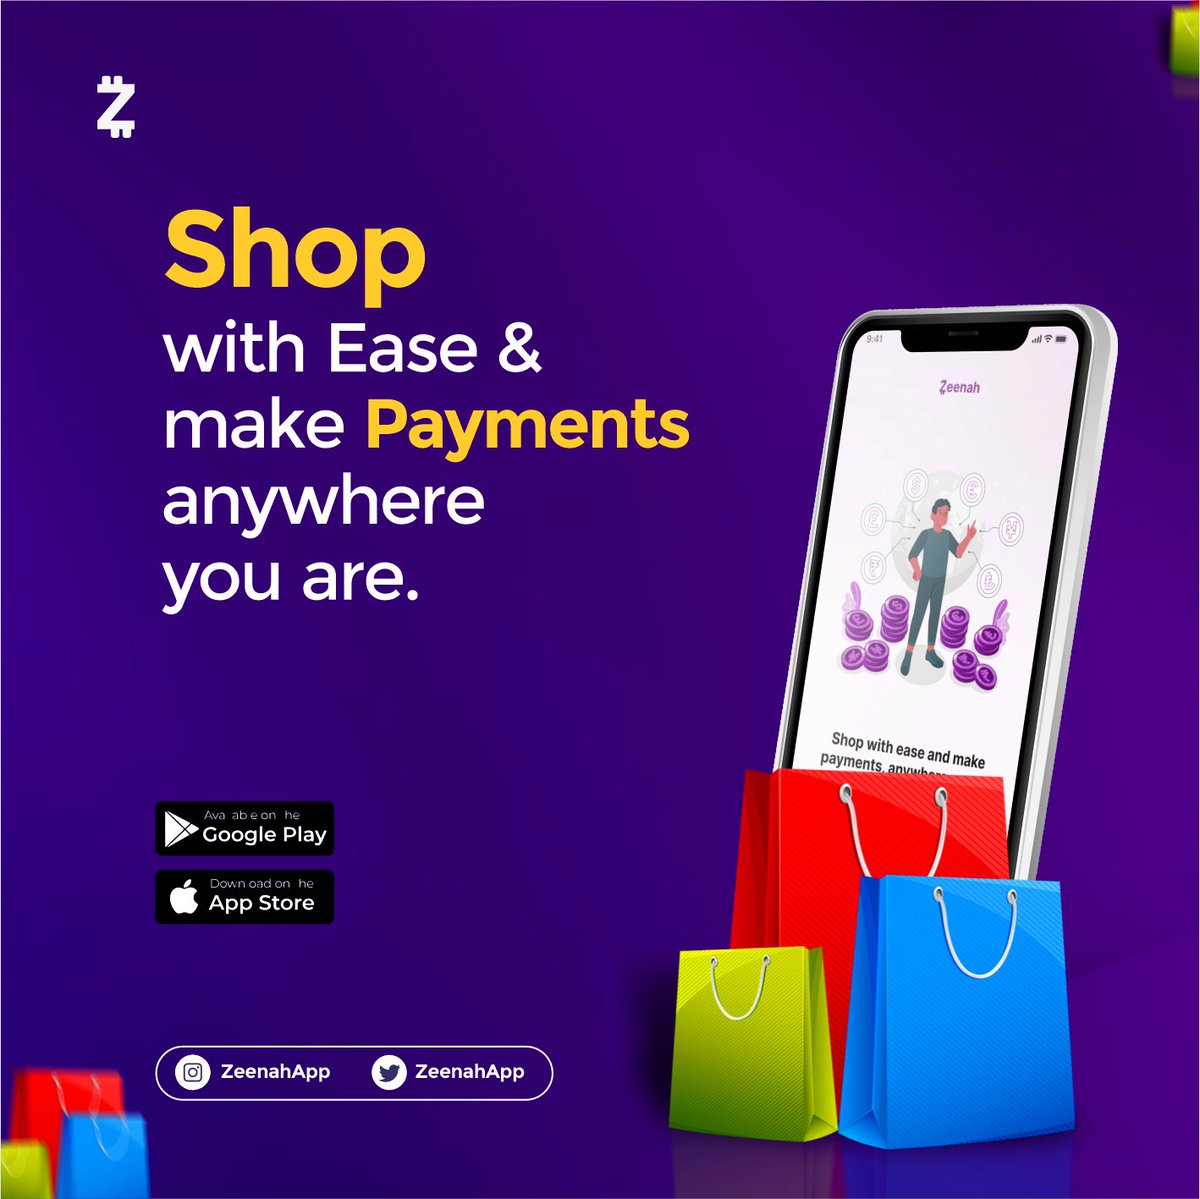 Shop and pay anywhere at ease with Zeenah App, we gat you!😎🛍🛒

#Shop  #Payment
#PayWithZeenah  #EasyPayment